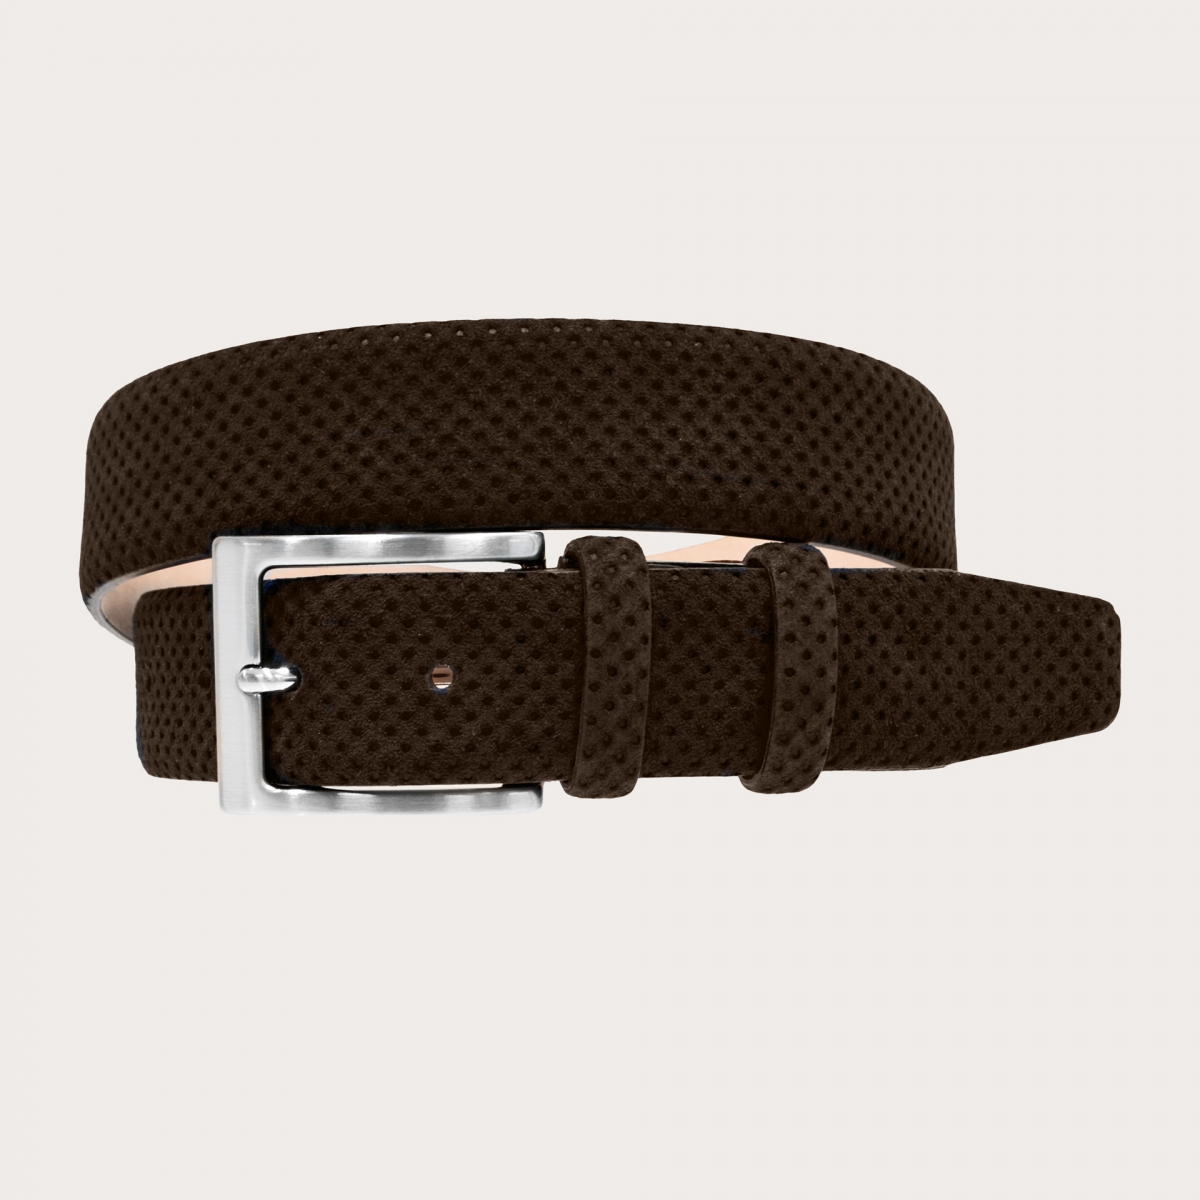 BRUCLE Brown belt in drilled pattern suede leather